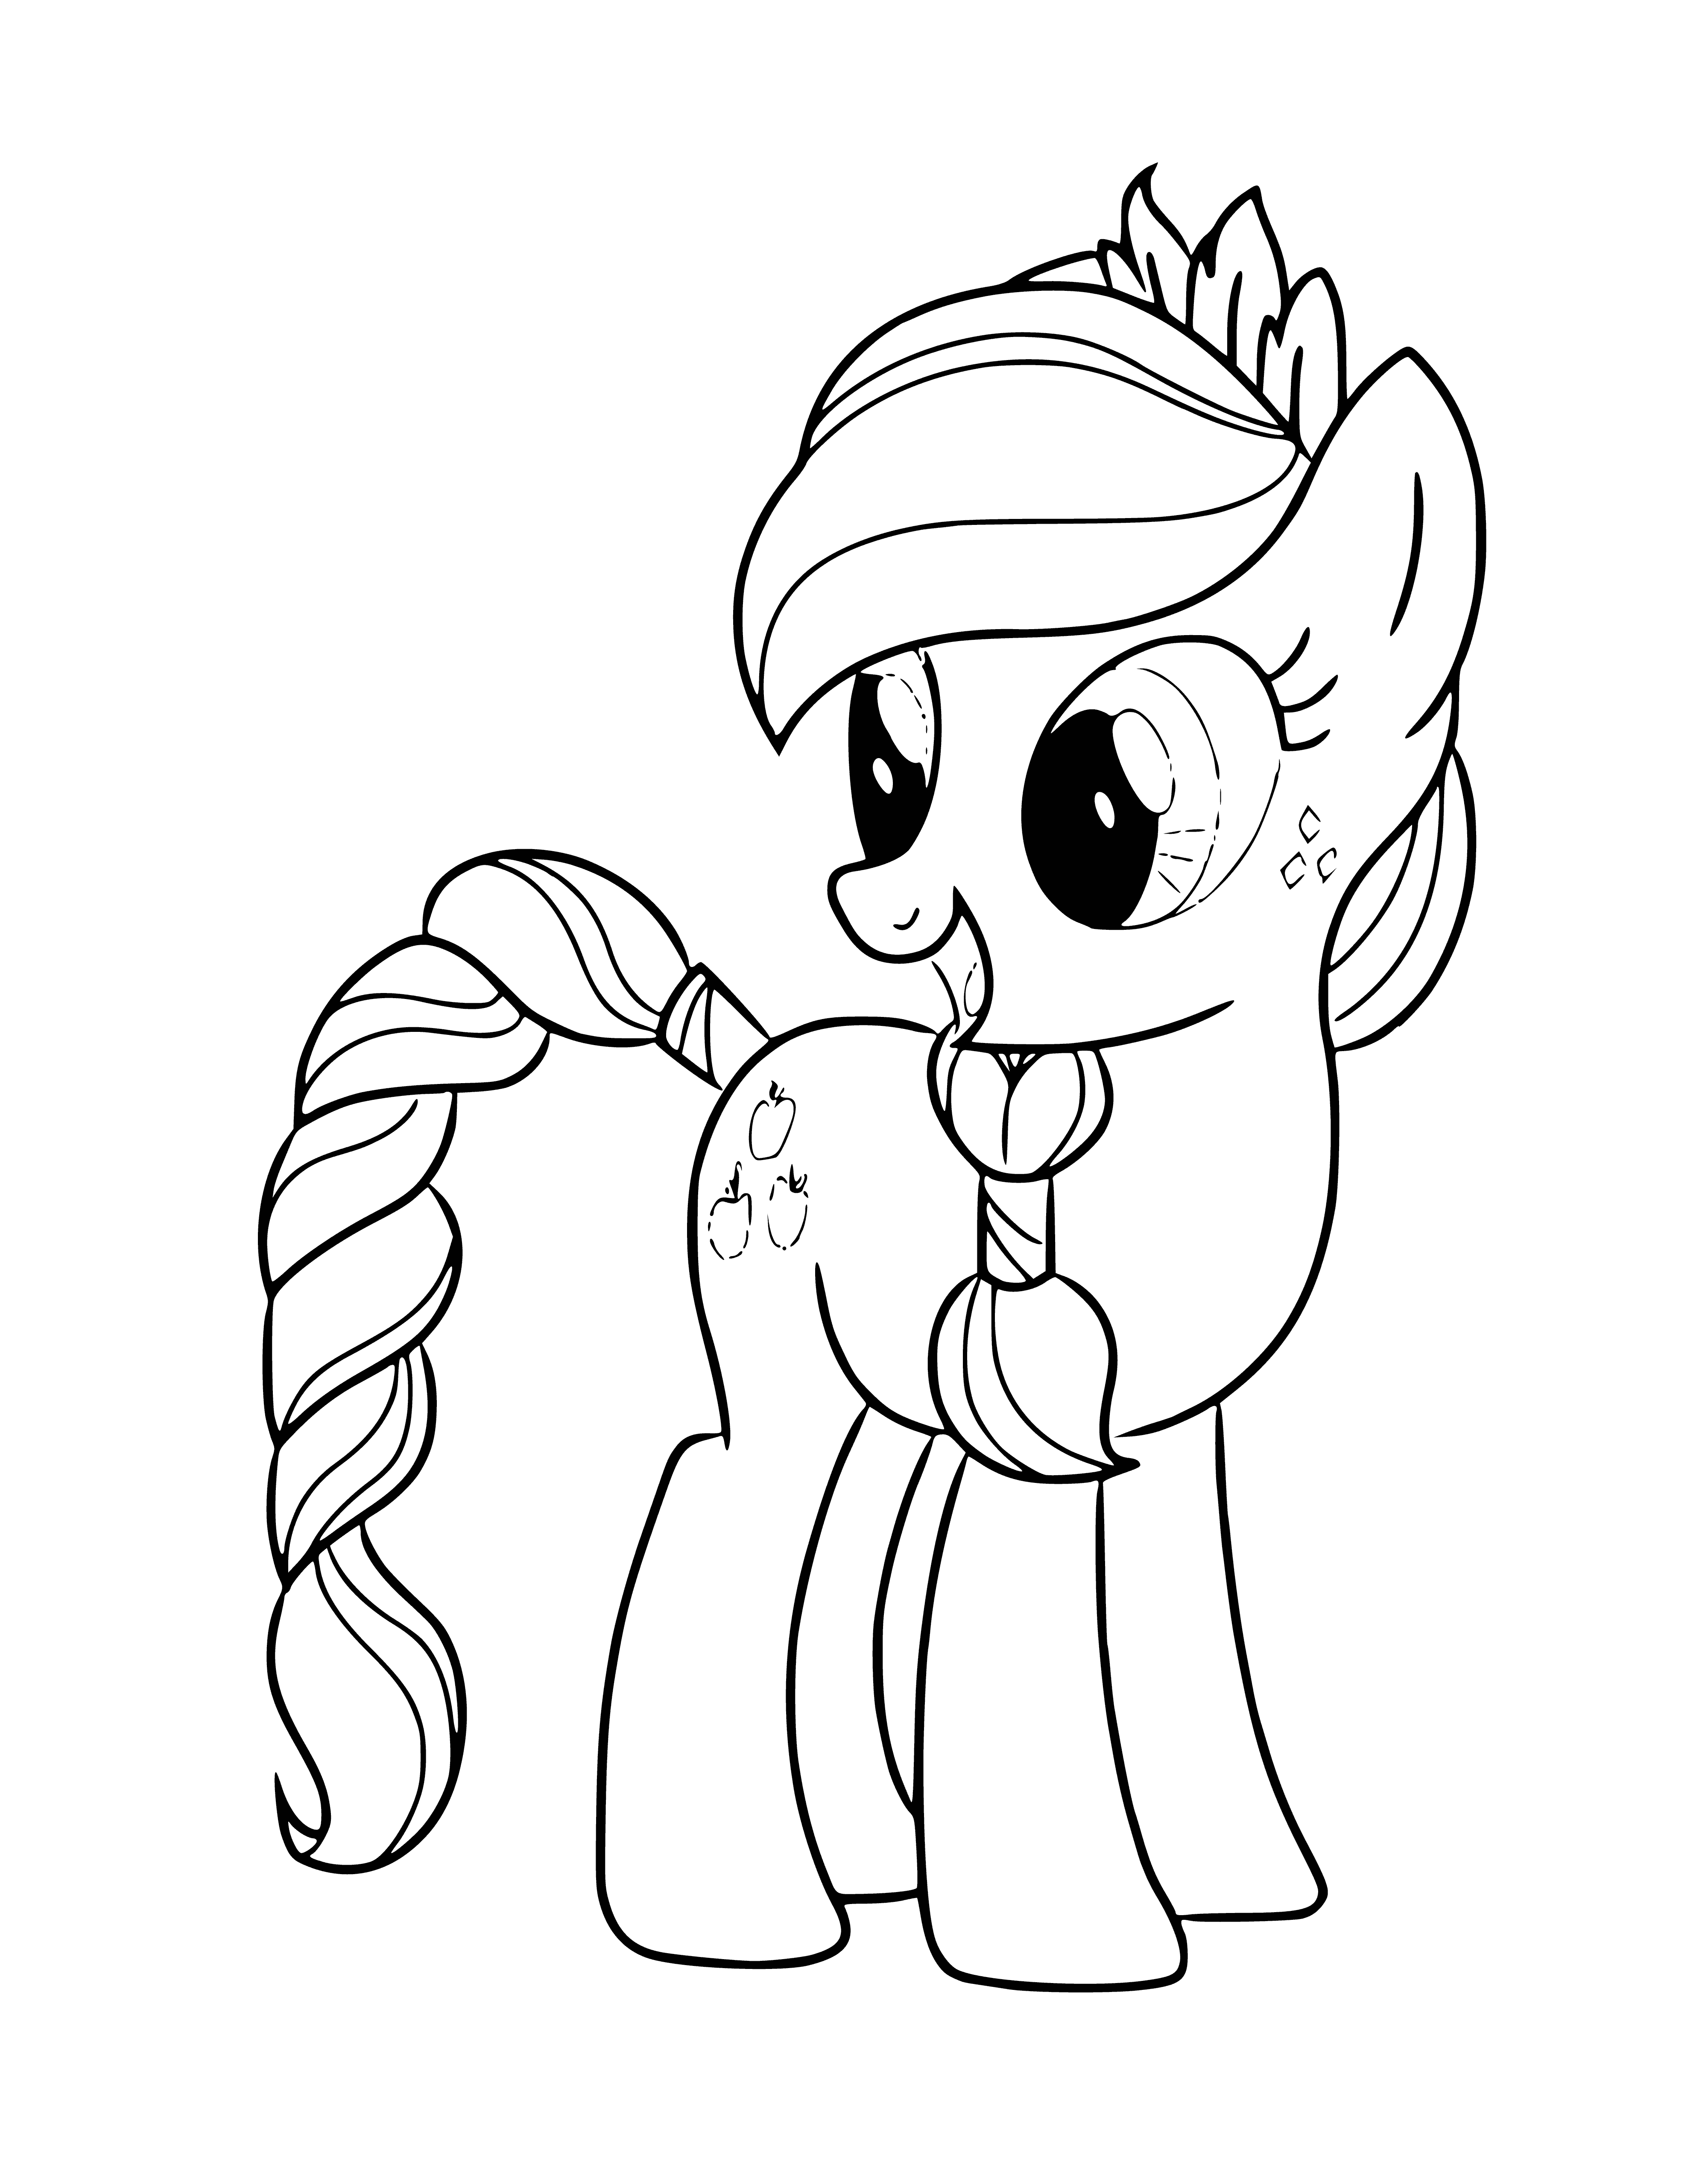 A glass of carbonated light brown liquid with a slice of apple on the rim is featured in this coloring page. #AppleCider